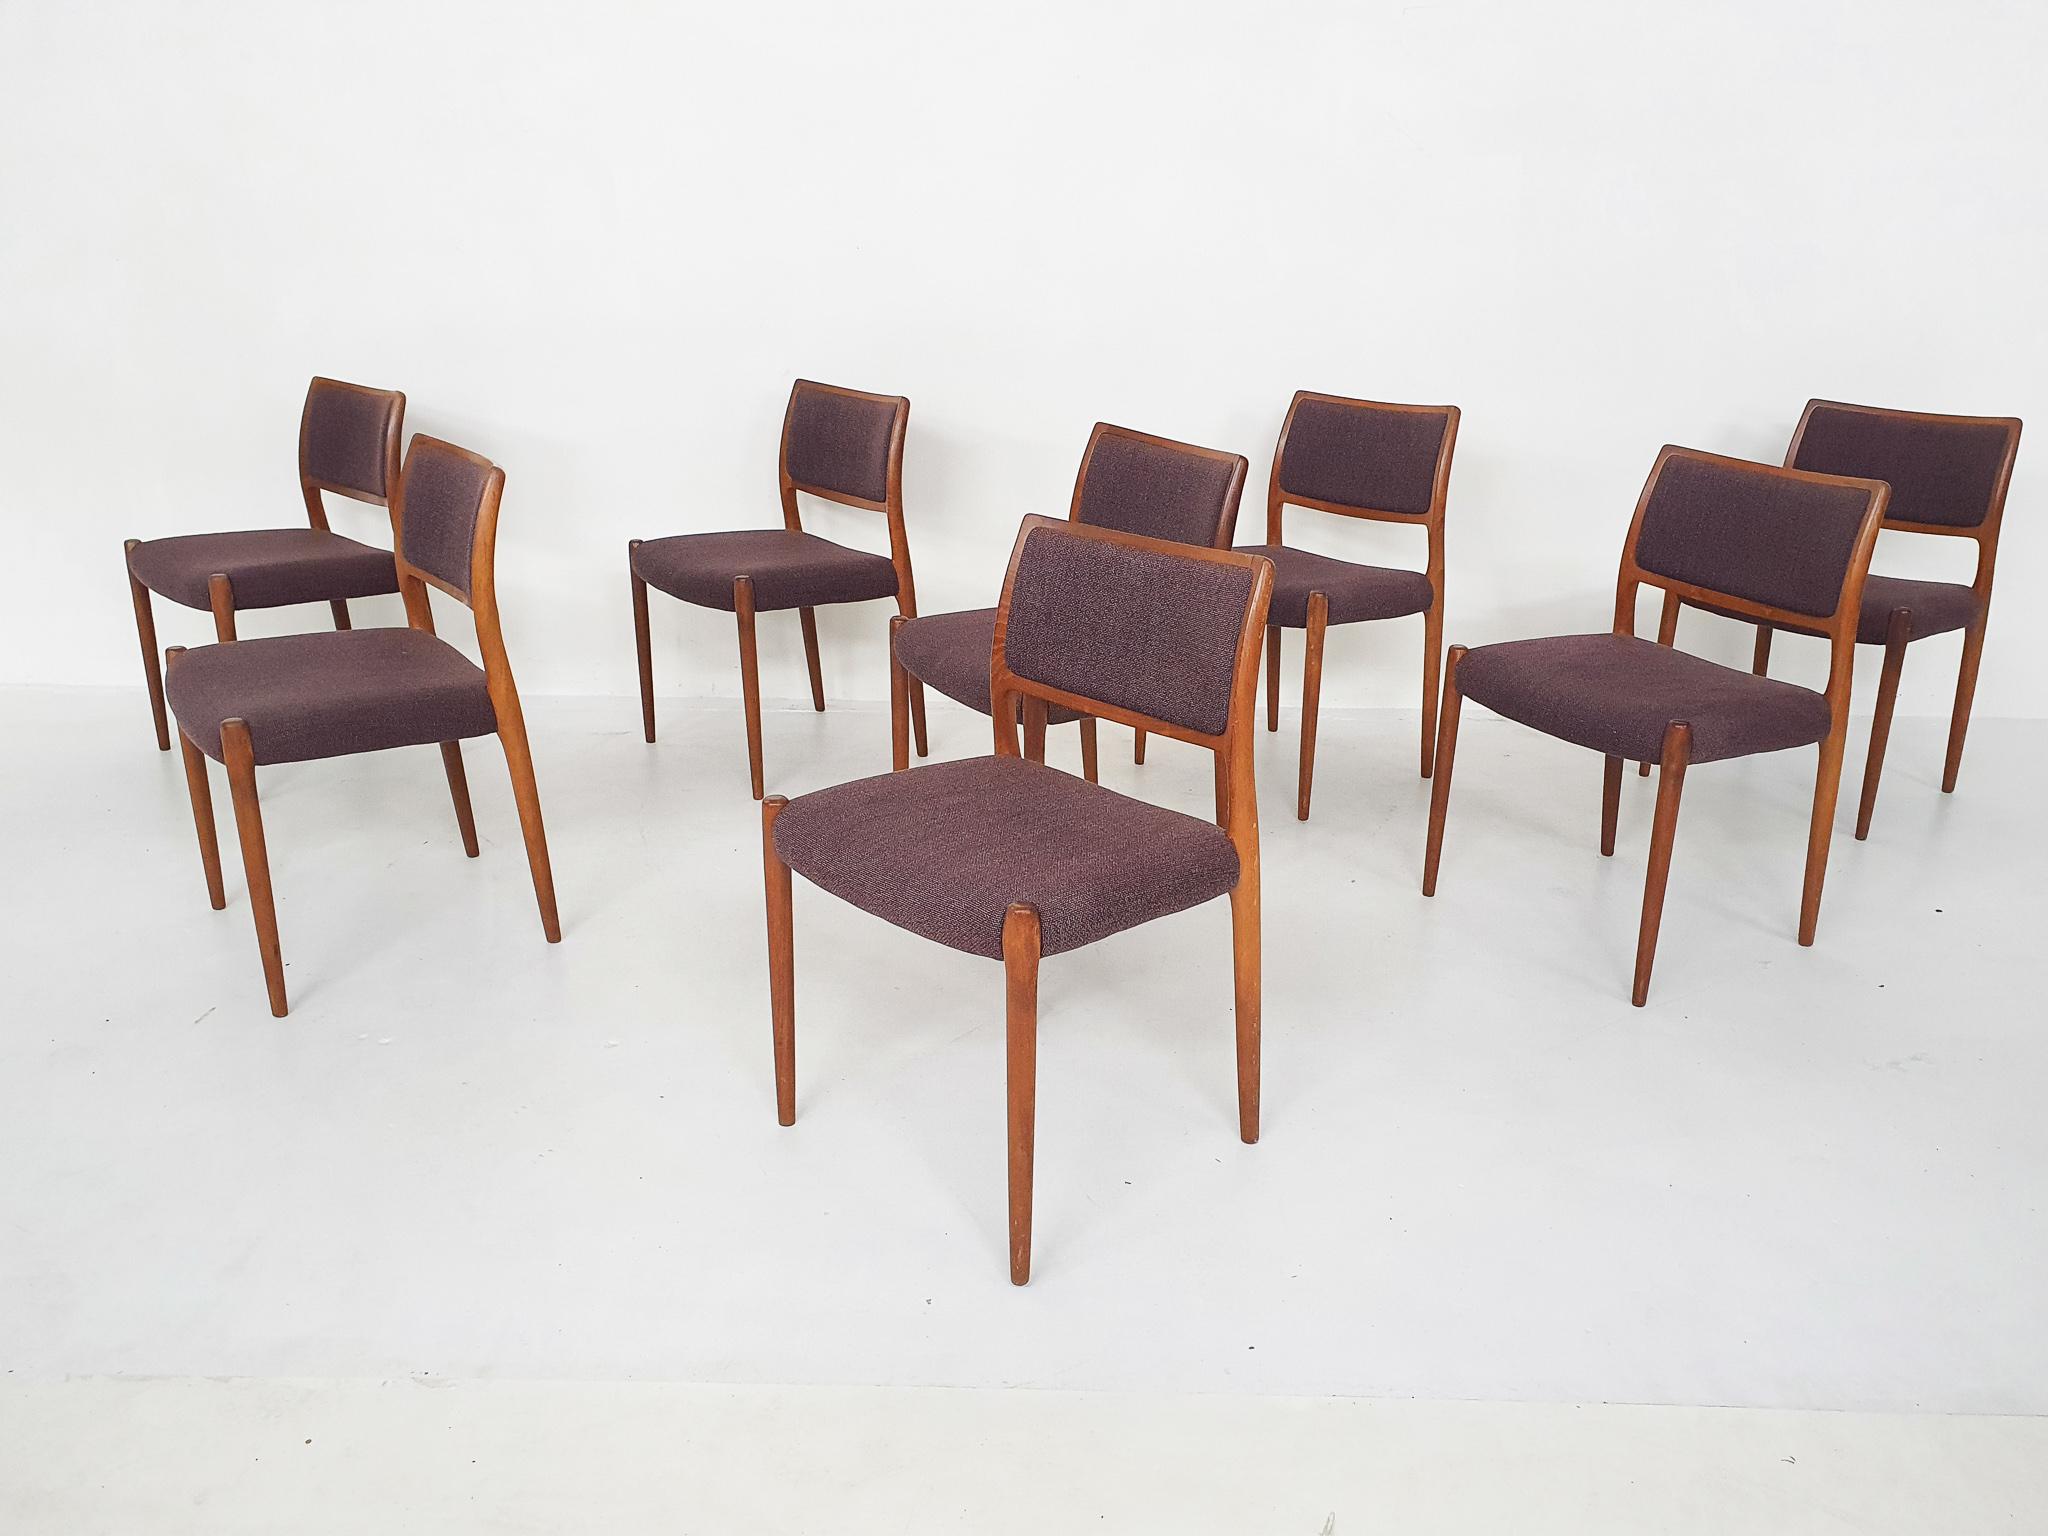 Teak dining chairs with purple upholstery. The former owner had recently reuphosltered the chairs, so the fabric is still in good condition. Only a small stain on one chair. 

Niels Otto Møller was a Danish designer and is one of the most